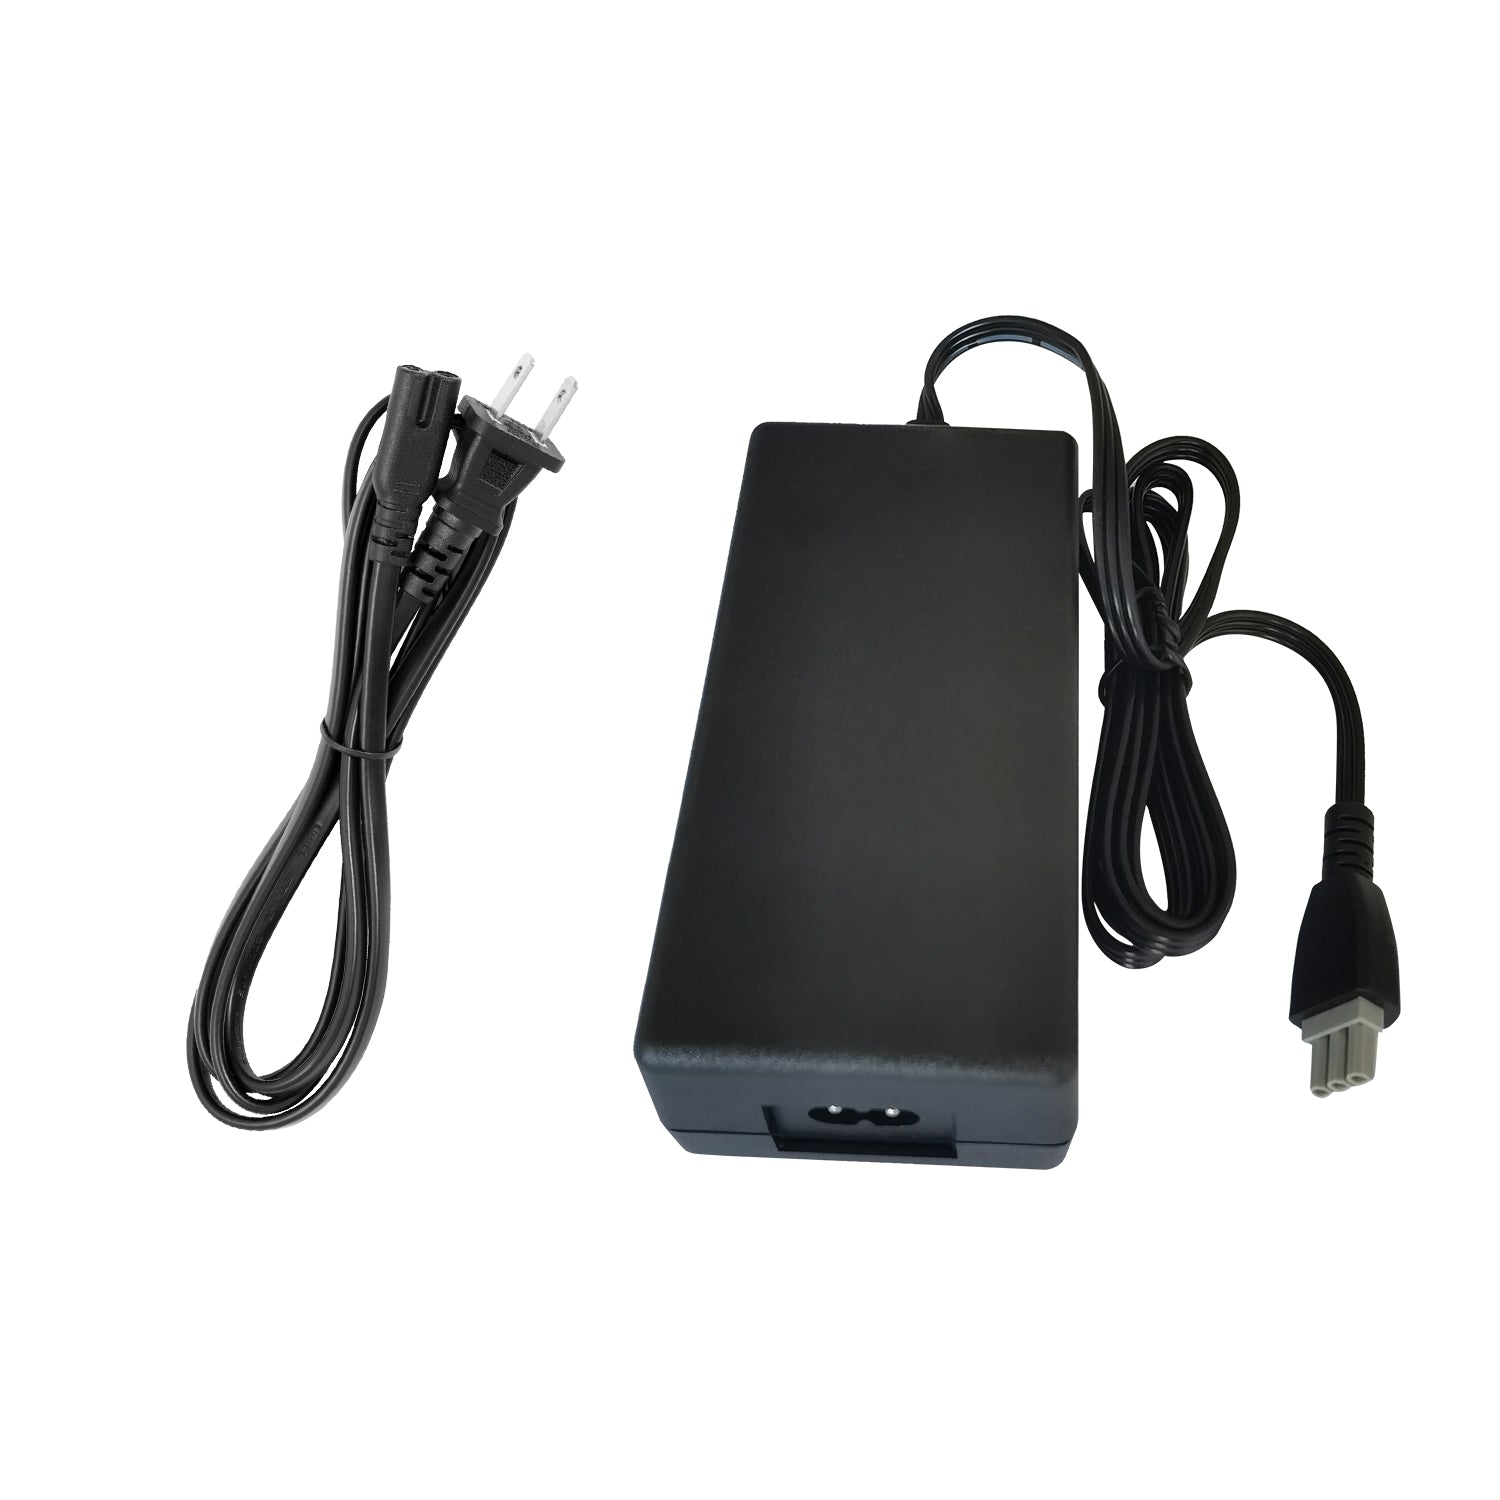 Power Adapter for hp officejet 6210xi Printer.